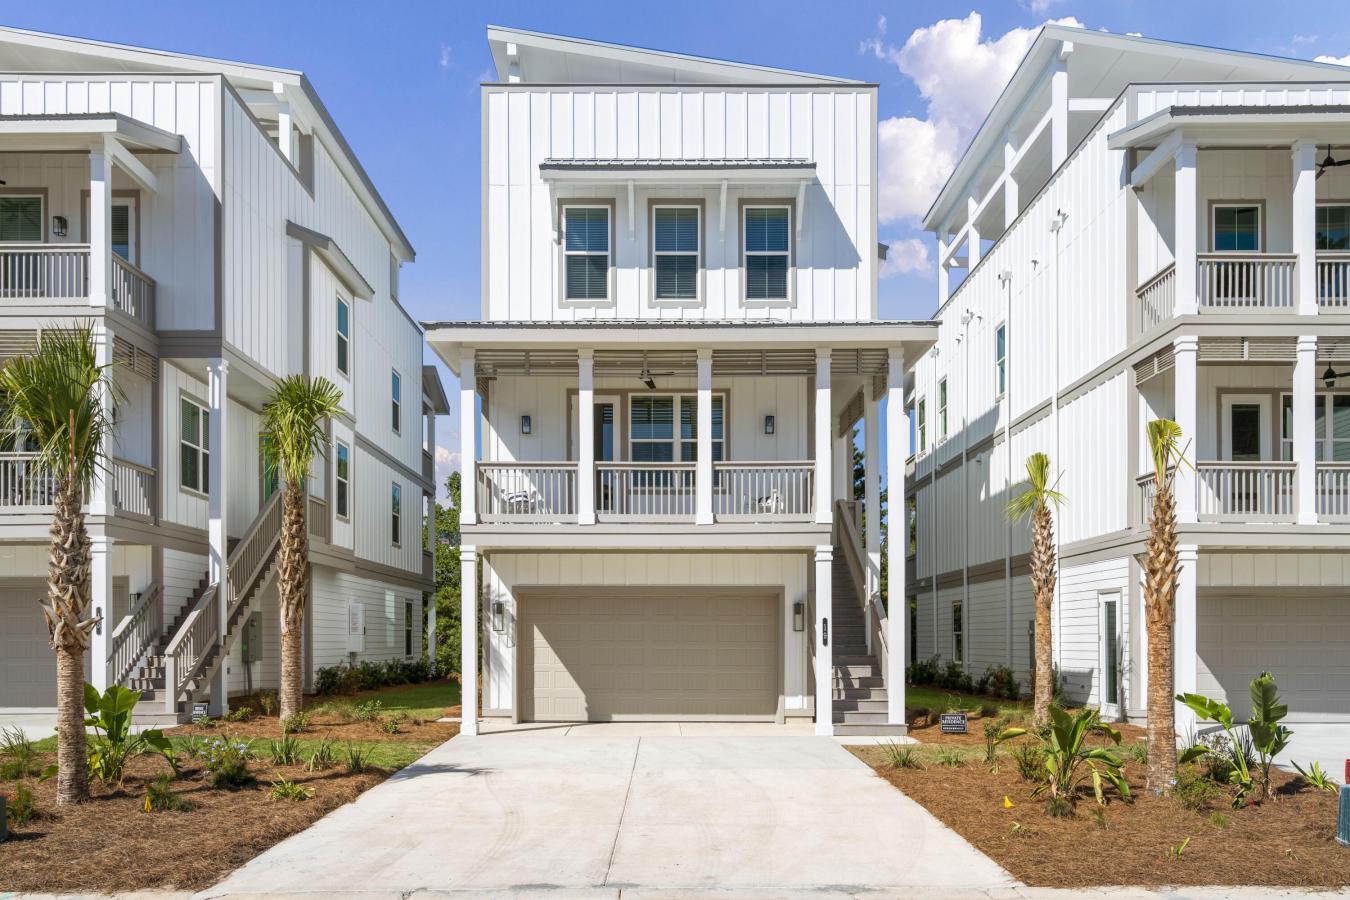 Lot 7 Twin Palms, Inlet Beach, Florida, 32461, United States, 4 Bedrooms Bedrooms, ,4 BathroomsBathrooms,Residential,For Sale,Lot 7 Twin Palms,1493140